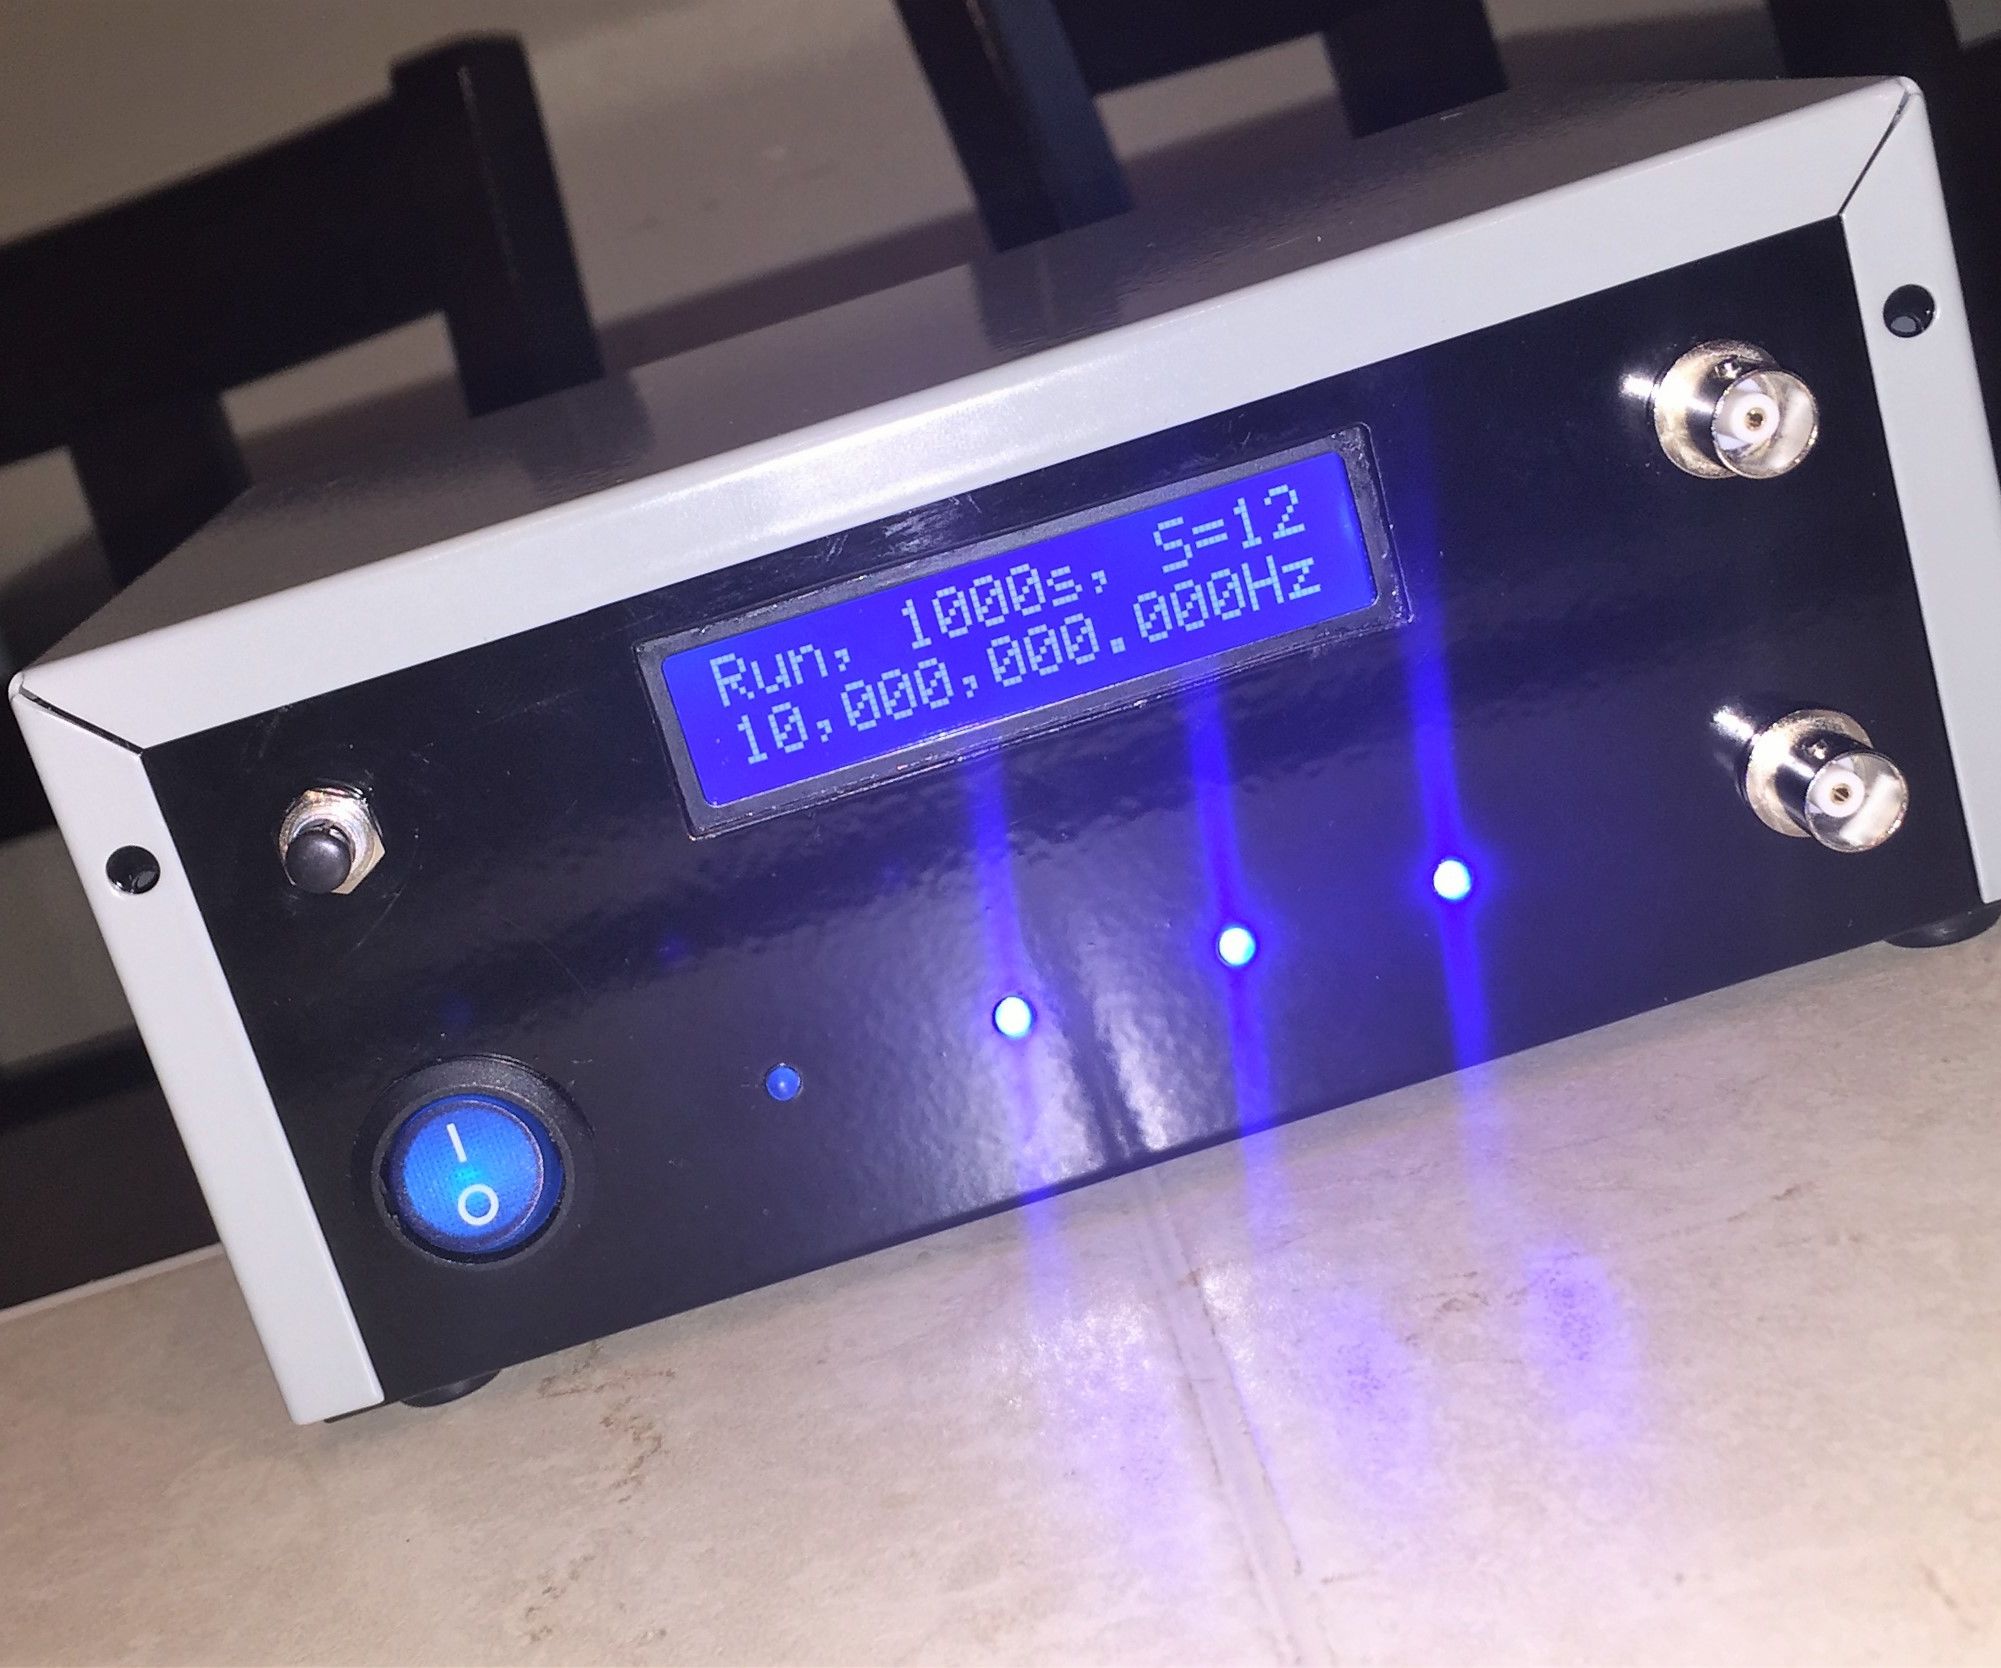 GPSDO YT 10 Mhz Lcd 2x16 With LED, UTC Time and GPS Localisation.